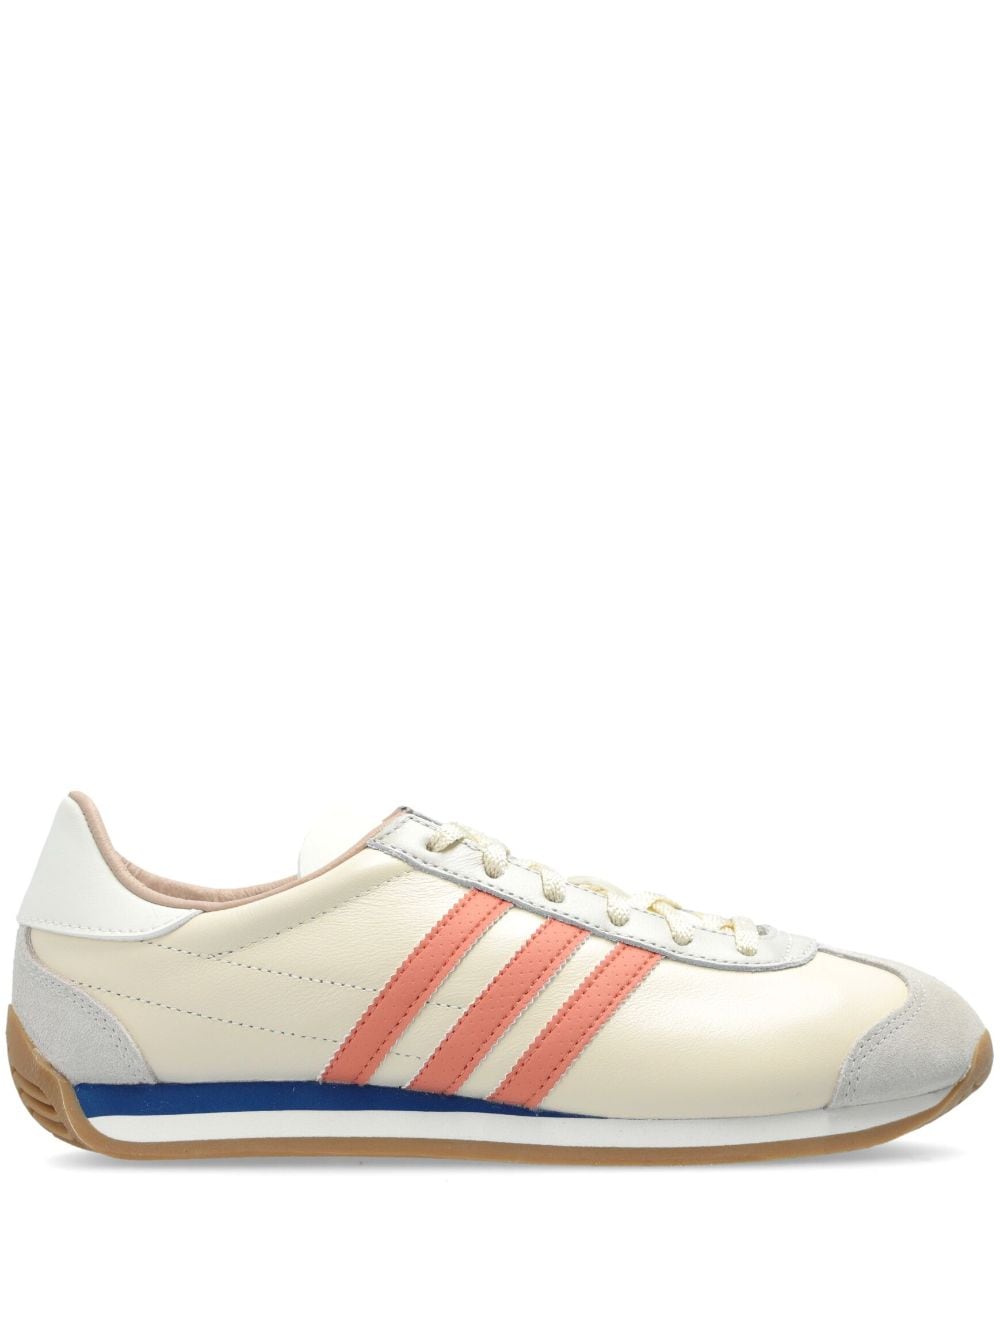 Adidas Originals Country Og Leather Sneakers In Nude